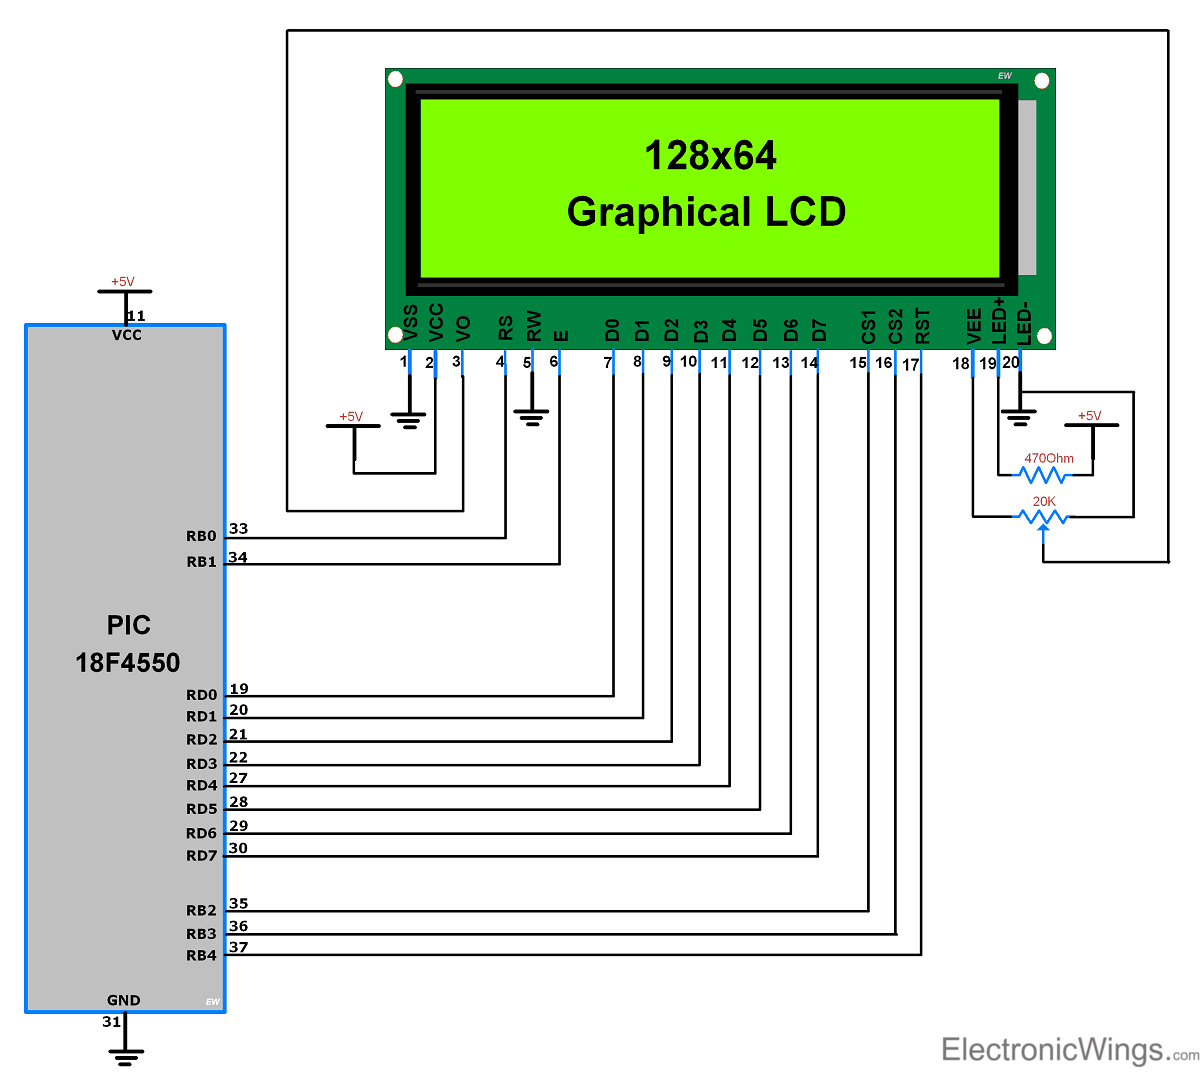 This is the picture of Interfacing GLCD128x64 with PIC microcontroller